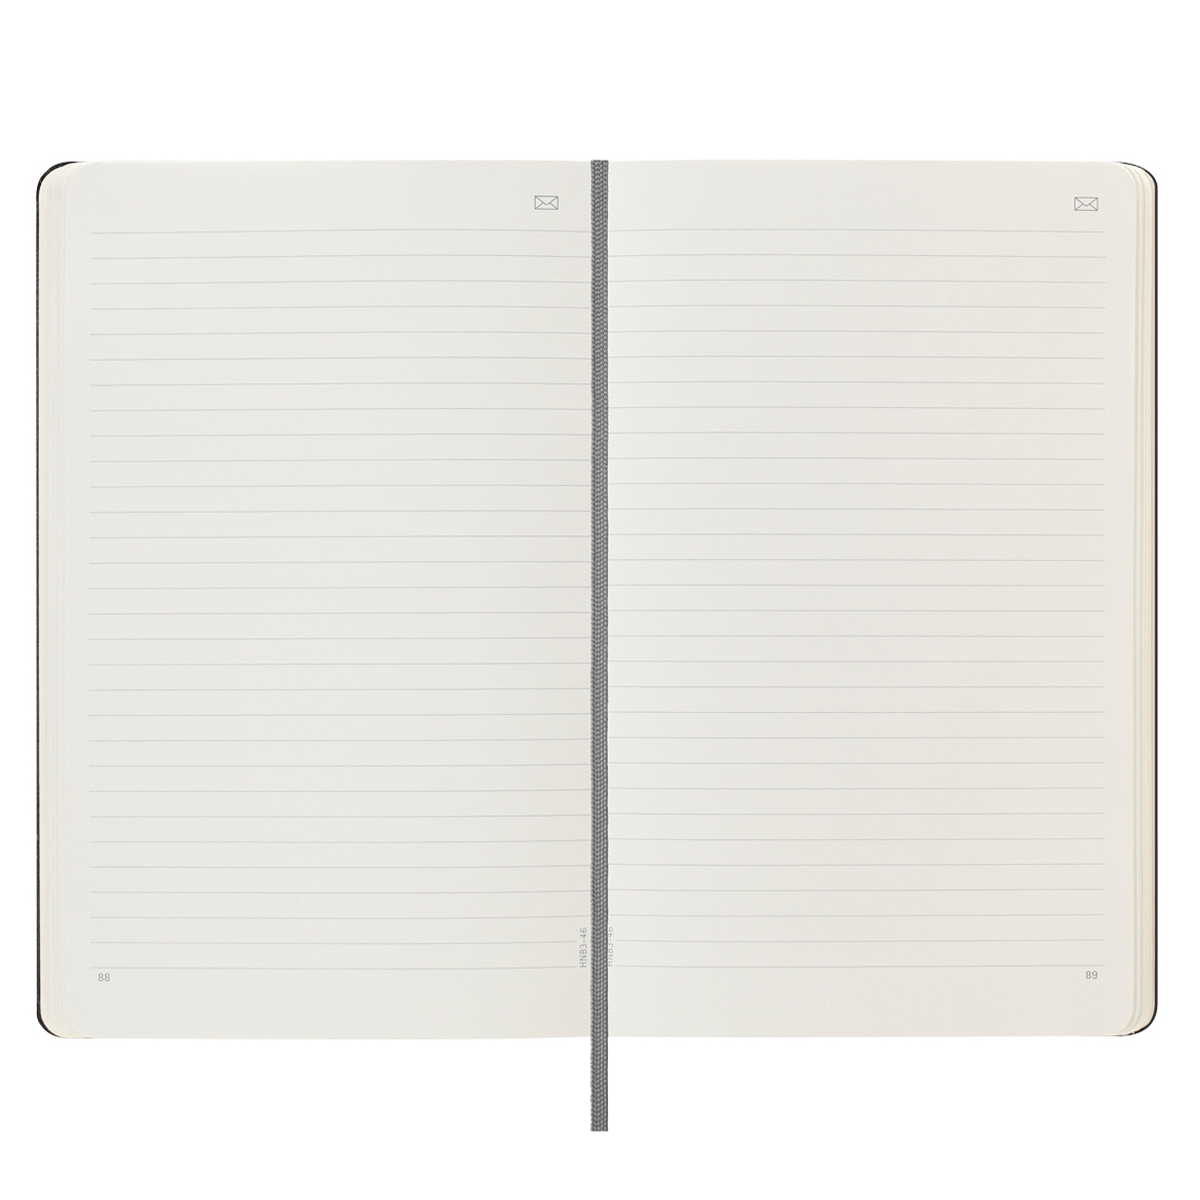 Smart Digital Notebook V3 Large Ruled in the group Pens / Office / Digital Writing at Pen Store (128799)